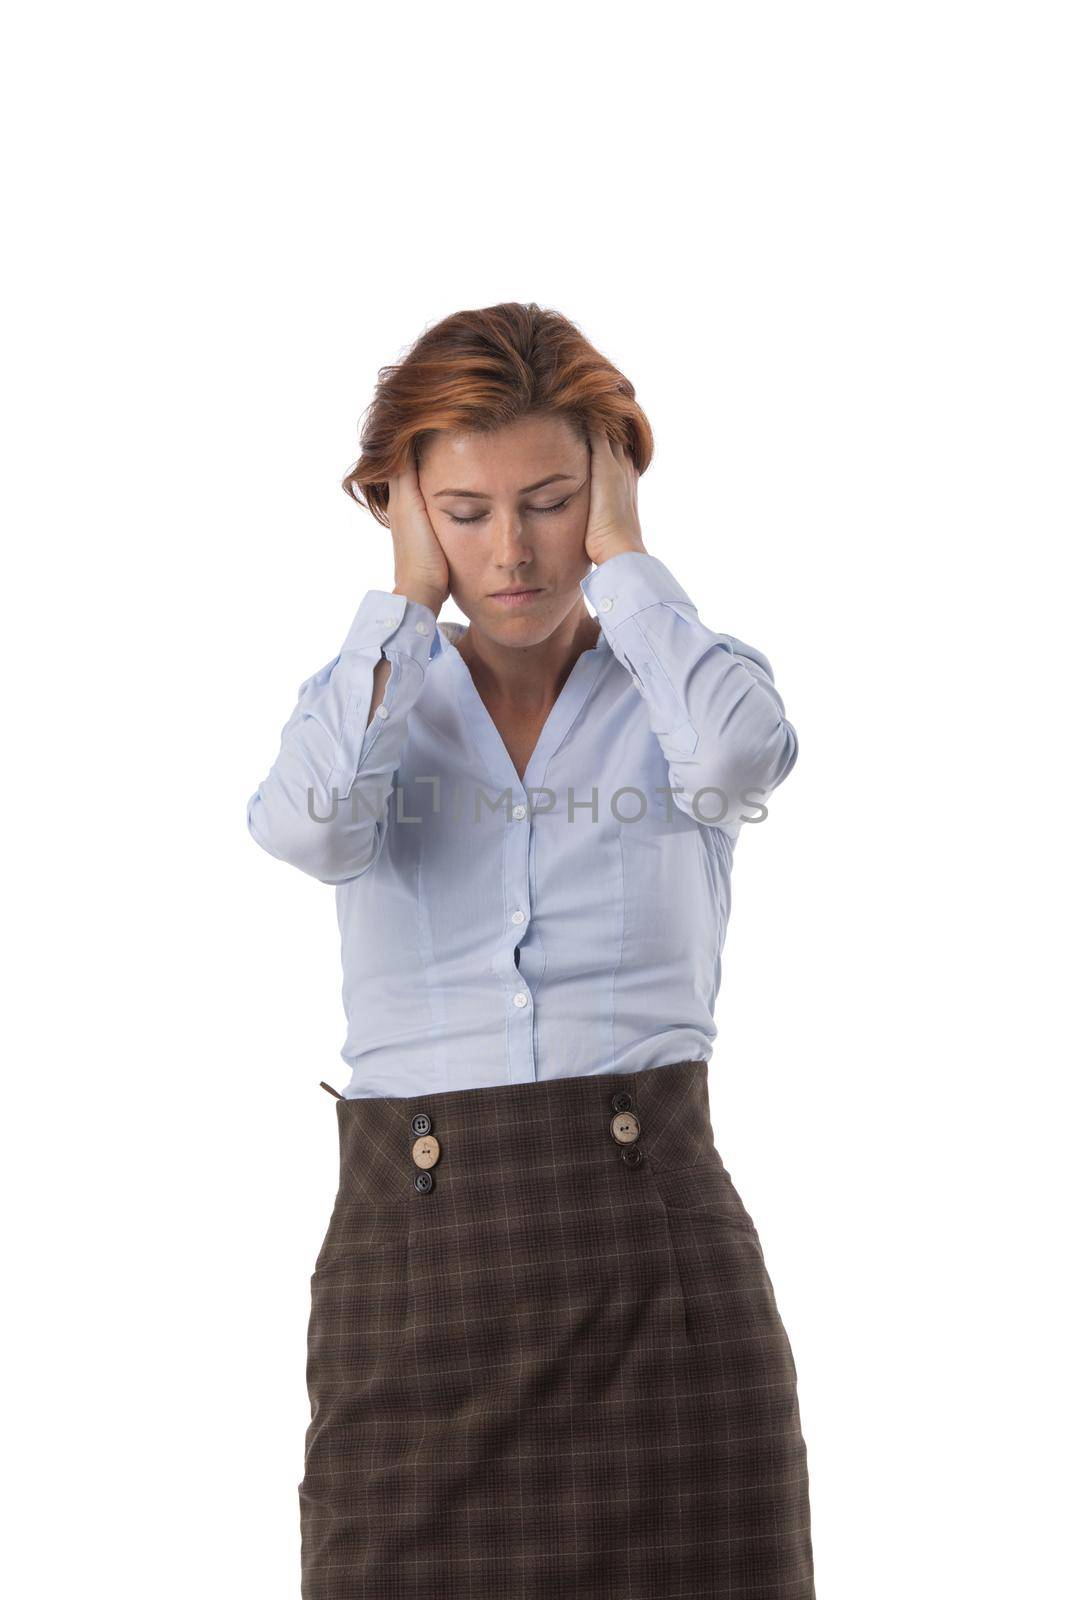 Portrait of businesswoman having headache and touching her head on white background